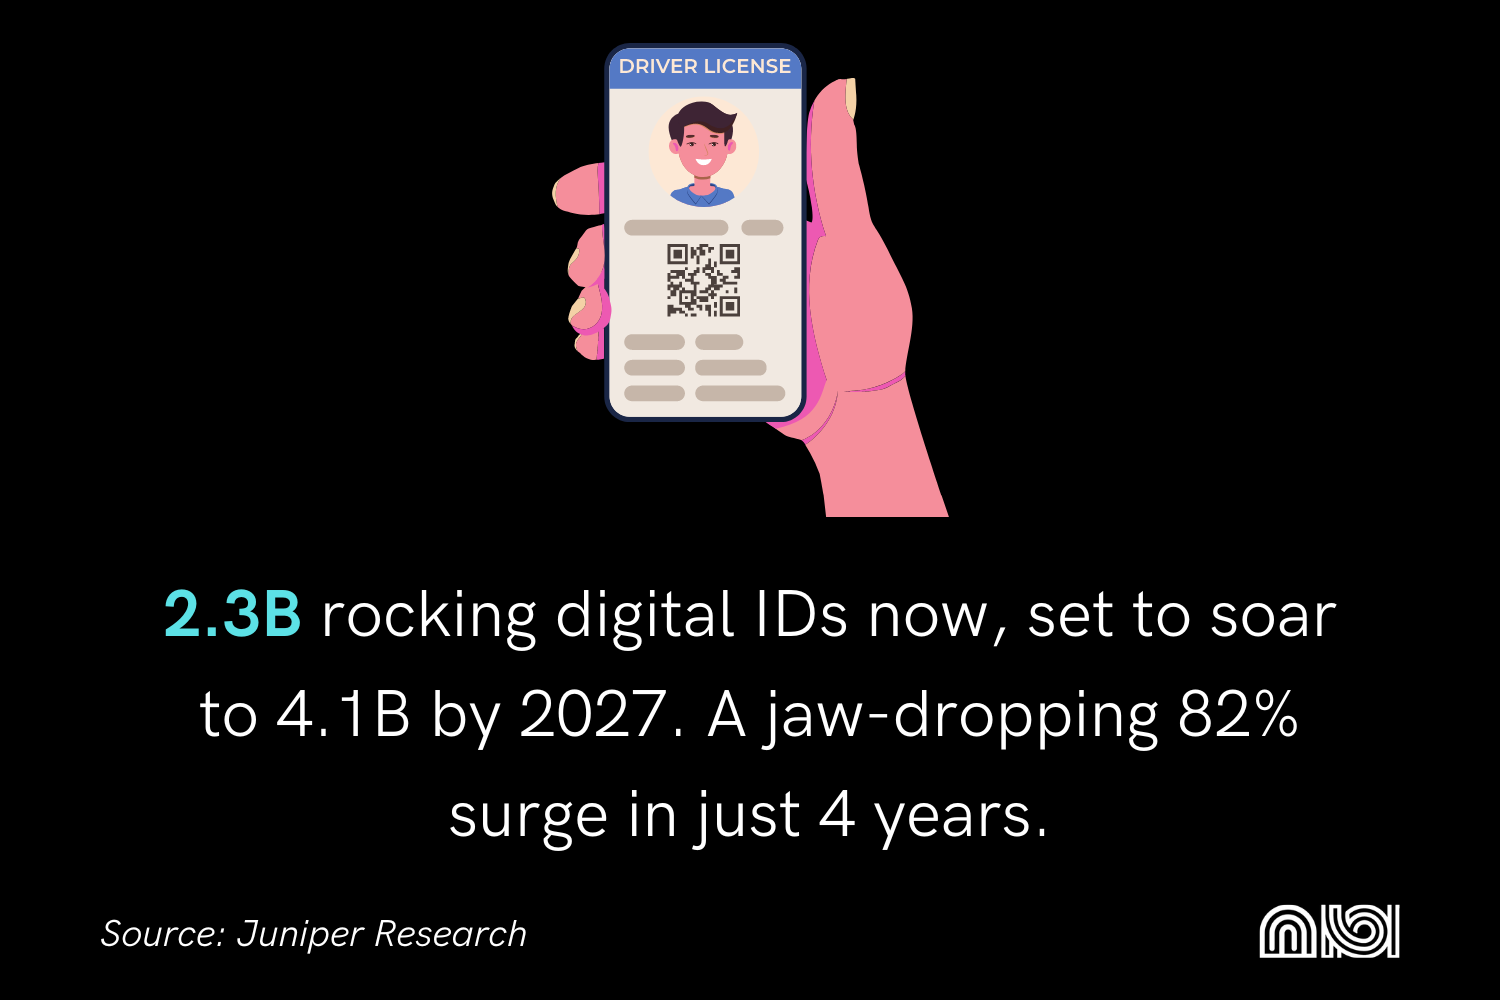 Global Digital ID Users Skyrocket: From 2.3B to 4.1B by 2027, an incredible 82% surge in 4 years!